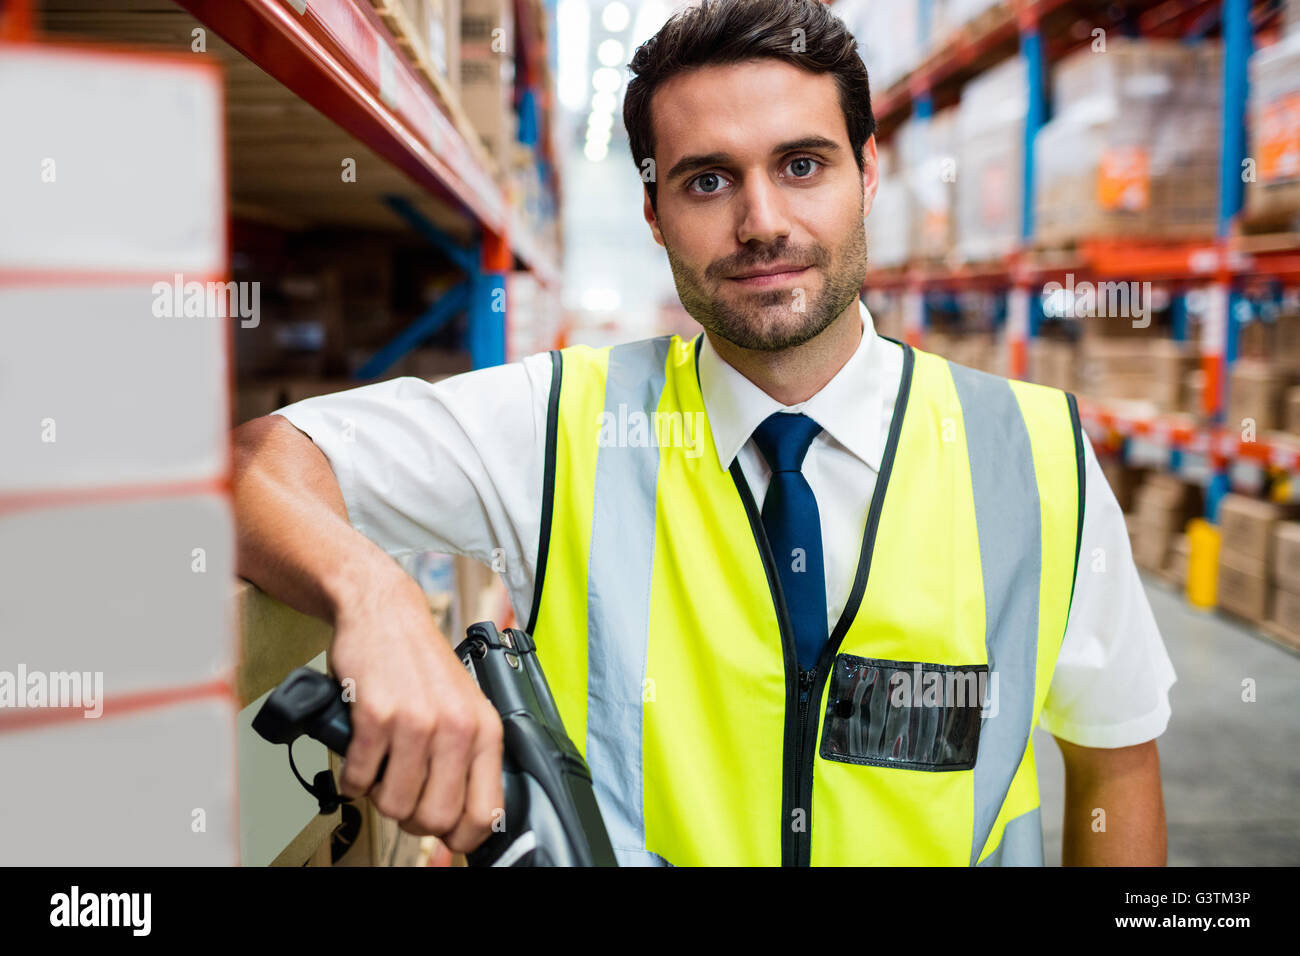 Warehouse manager with yellow coat and scanner in warehouse Stock Photo